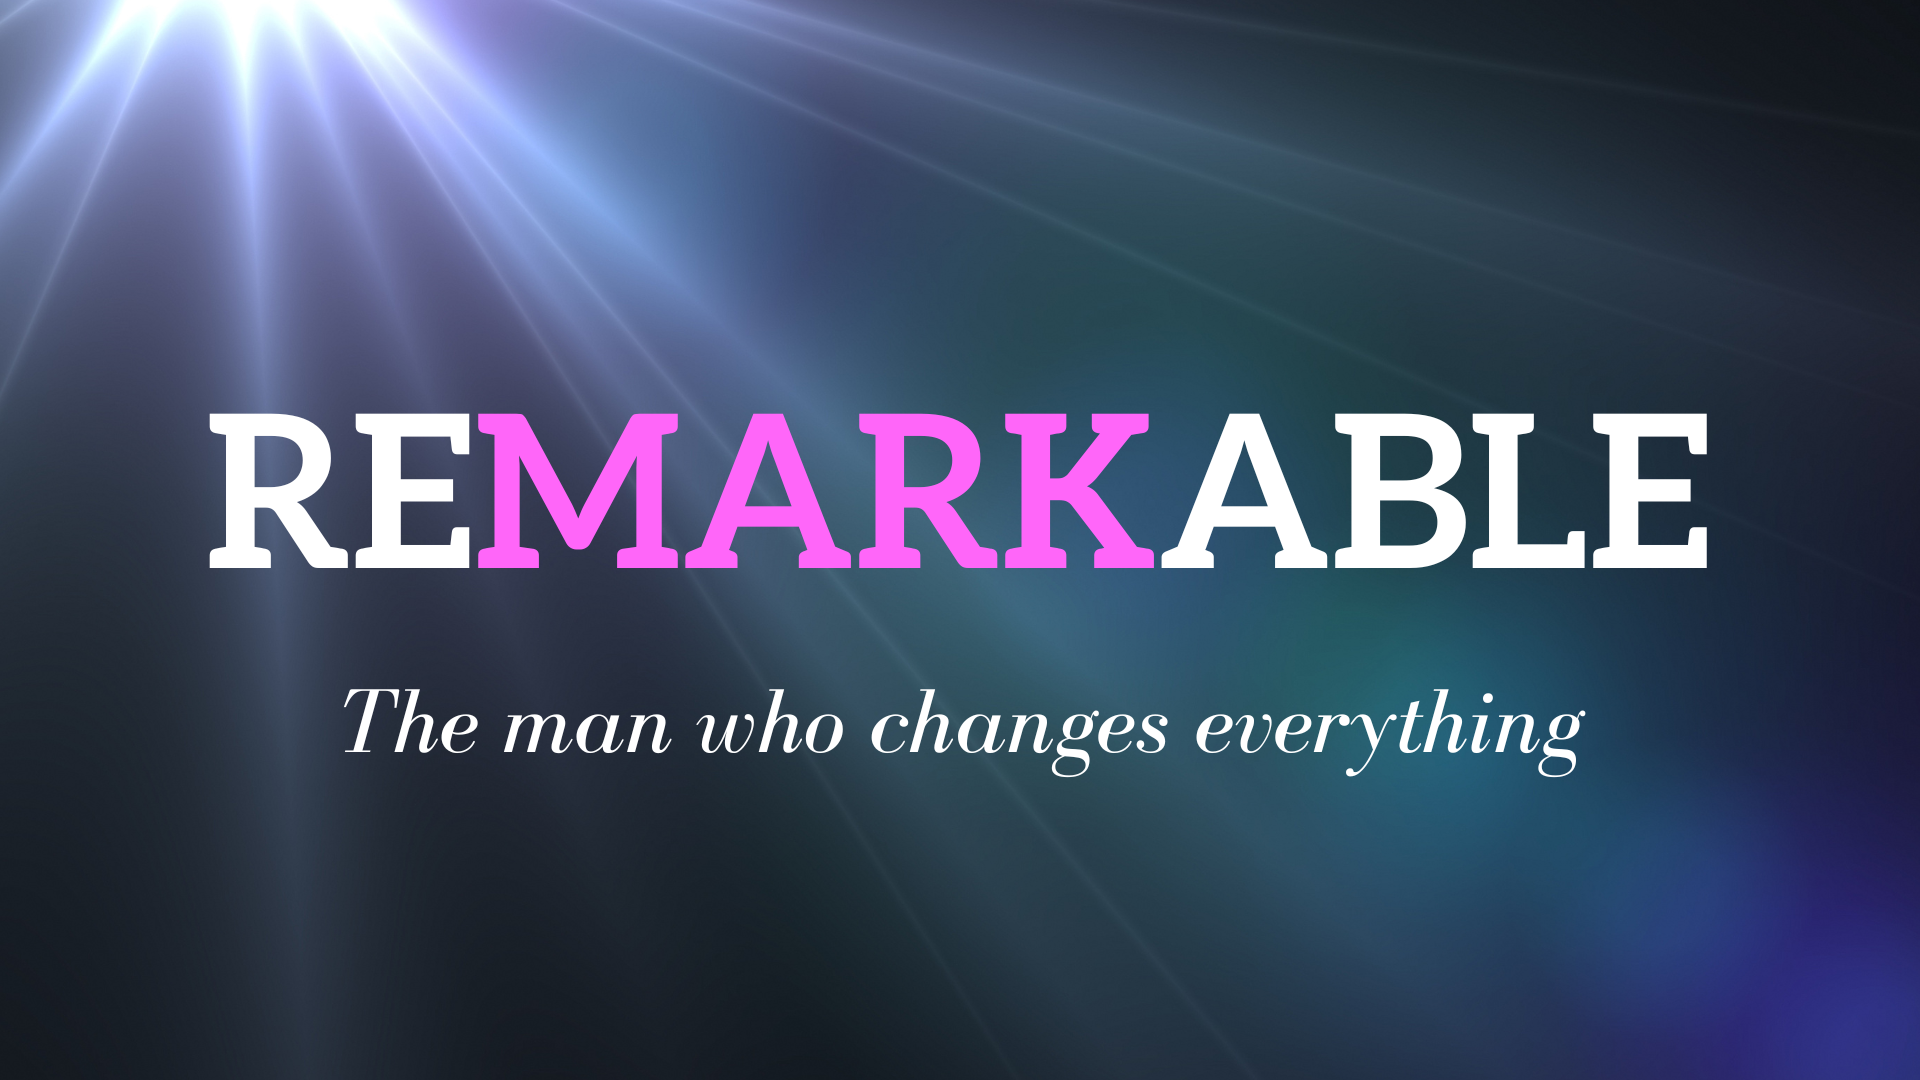 ReMARKable: The Man who changes everything